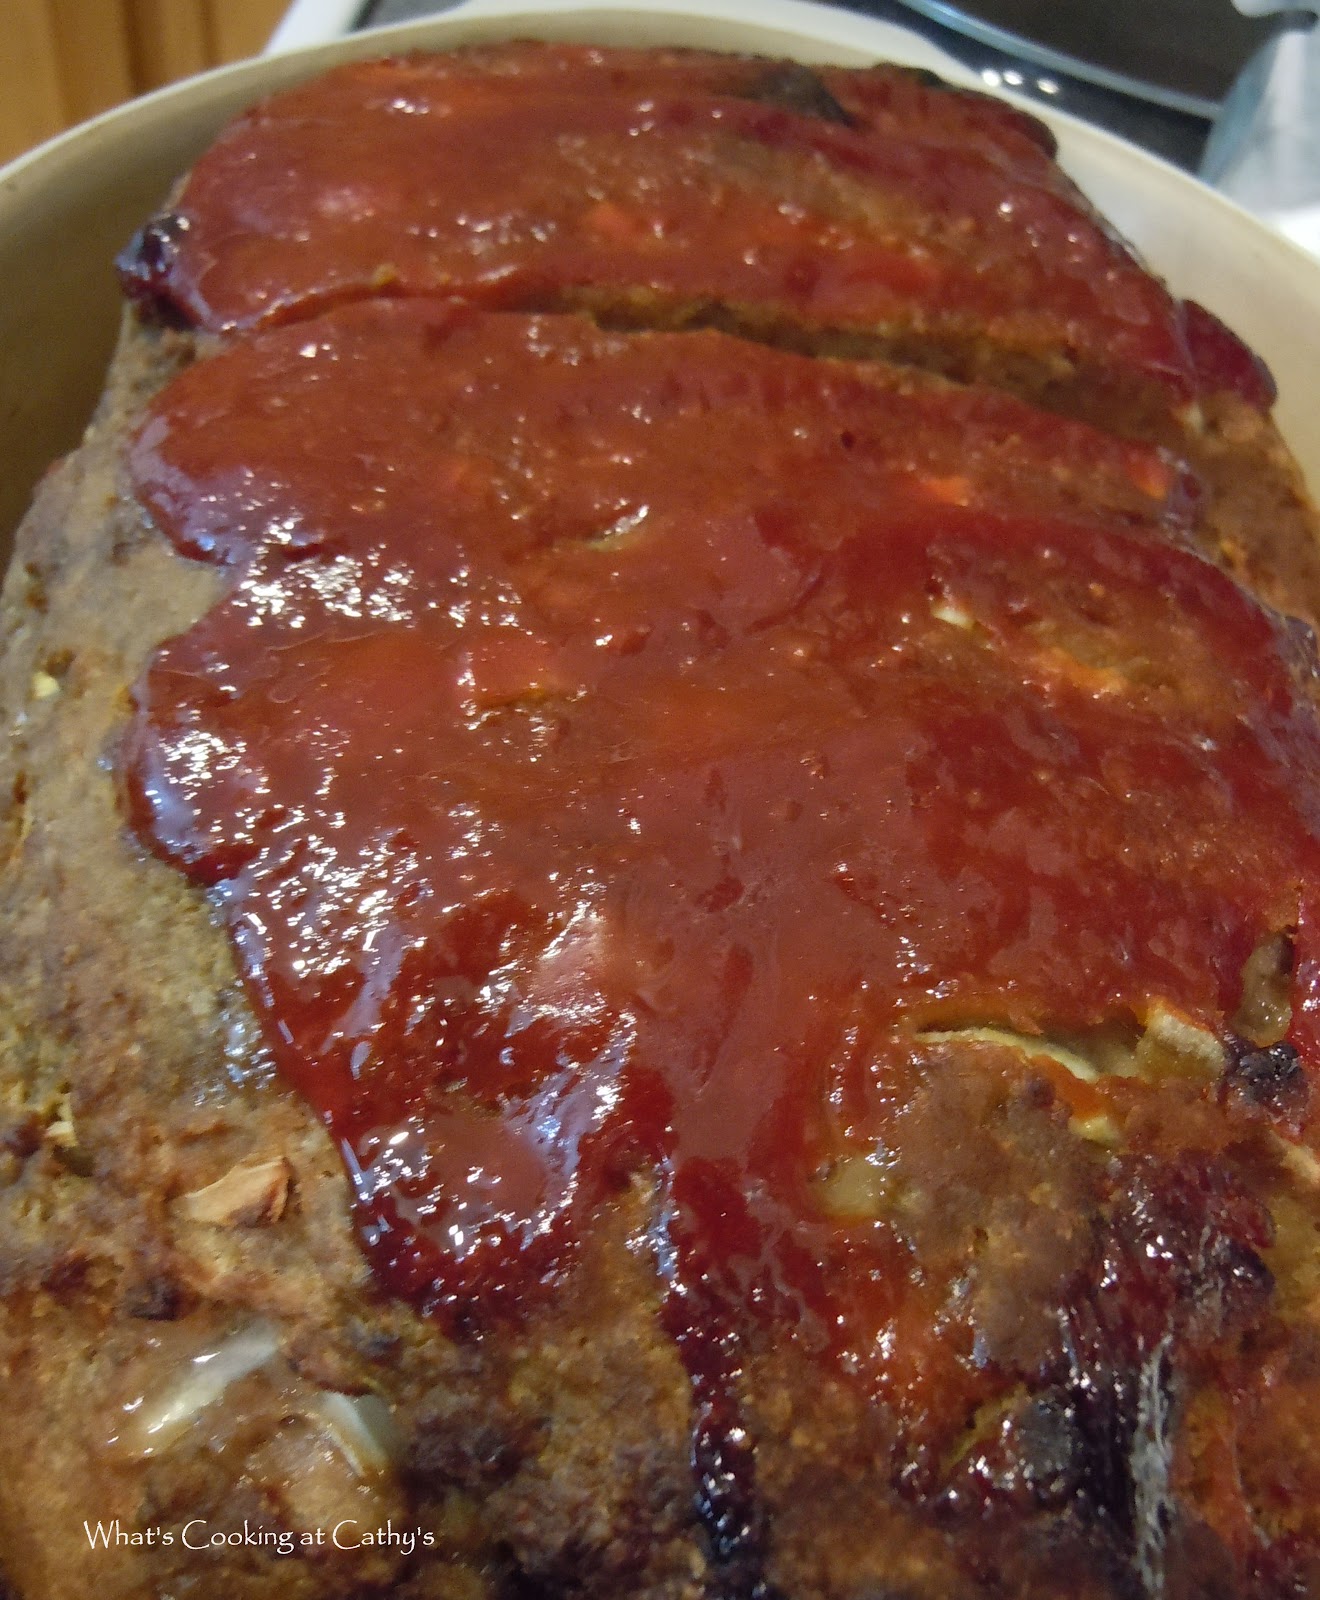 What's Cooking At Cathy's?: Meat Loaf